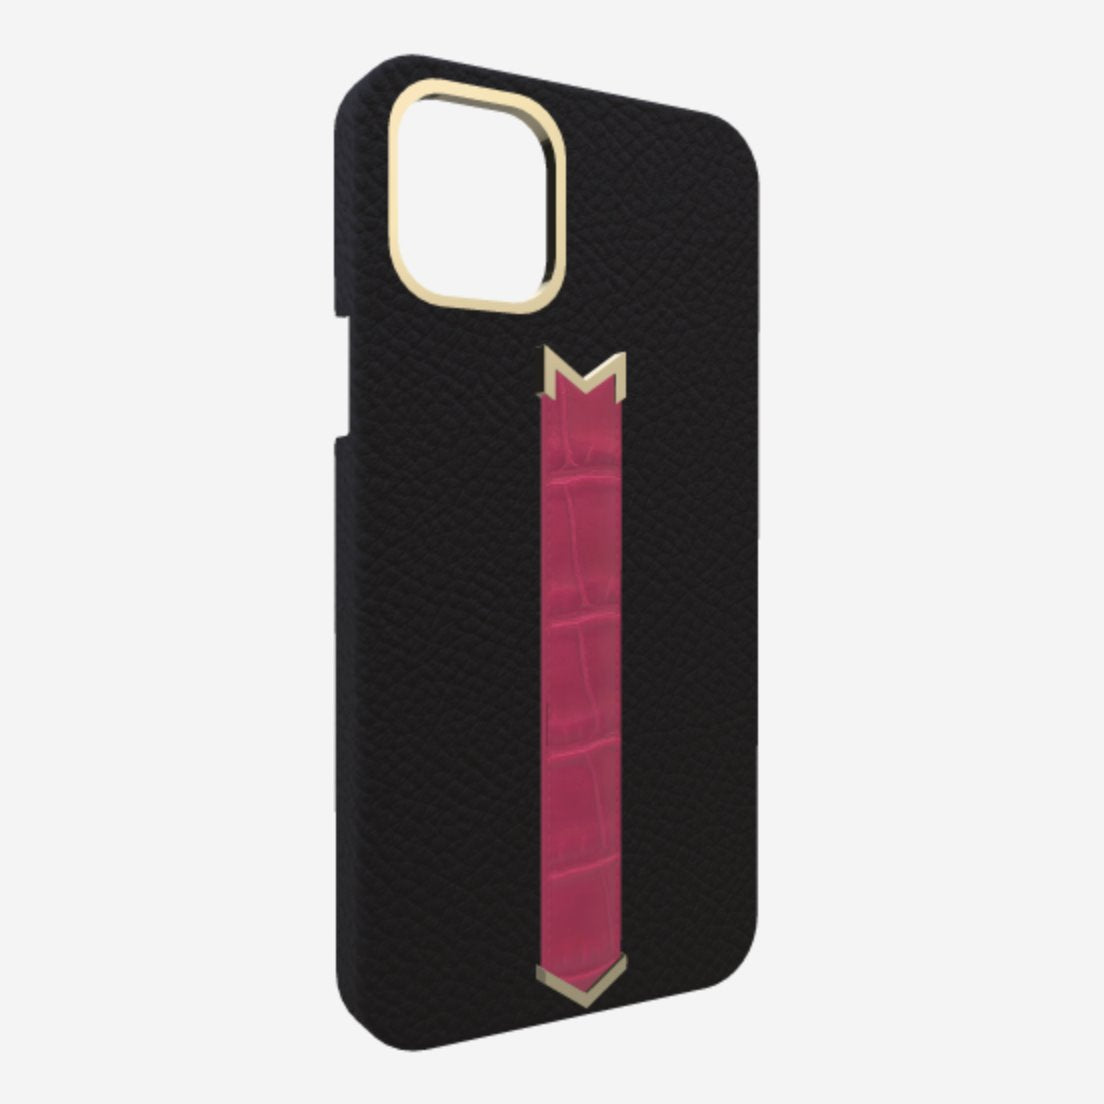 Gold Finger Strap Case for iPhone 13 Pro Max in Genuine Calfskin and Alligator Bond Black Fuchsia Party 